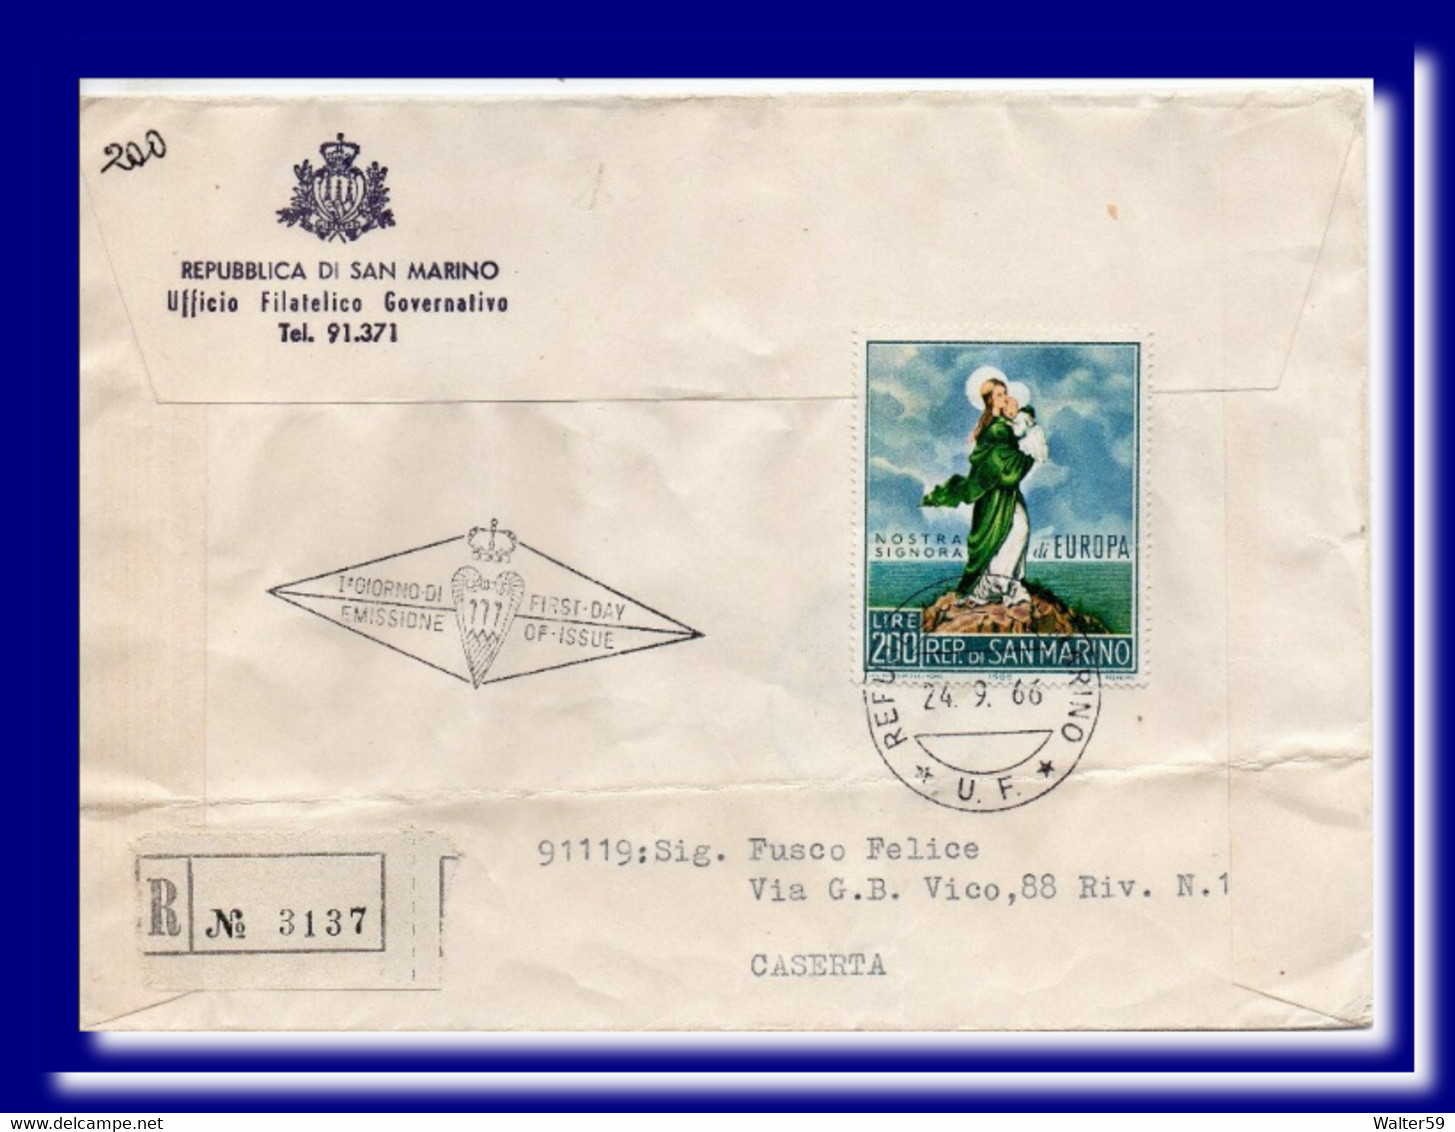 1966 San Marino Saint Marin Registered FDC 1er Jour Europe 66 To Italy Pmk Back Recommandee - FDC